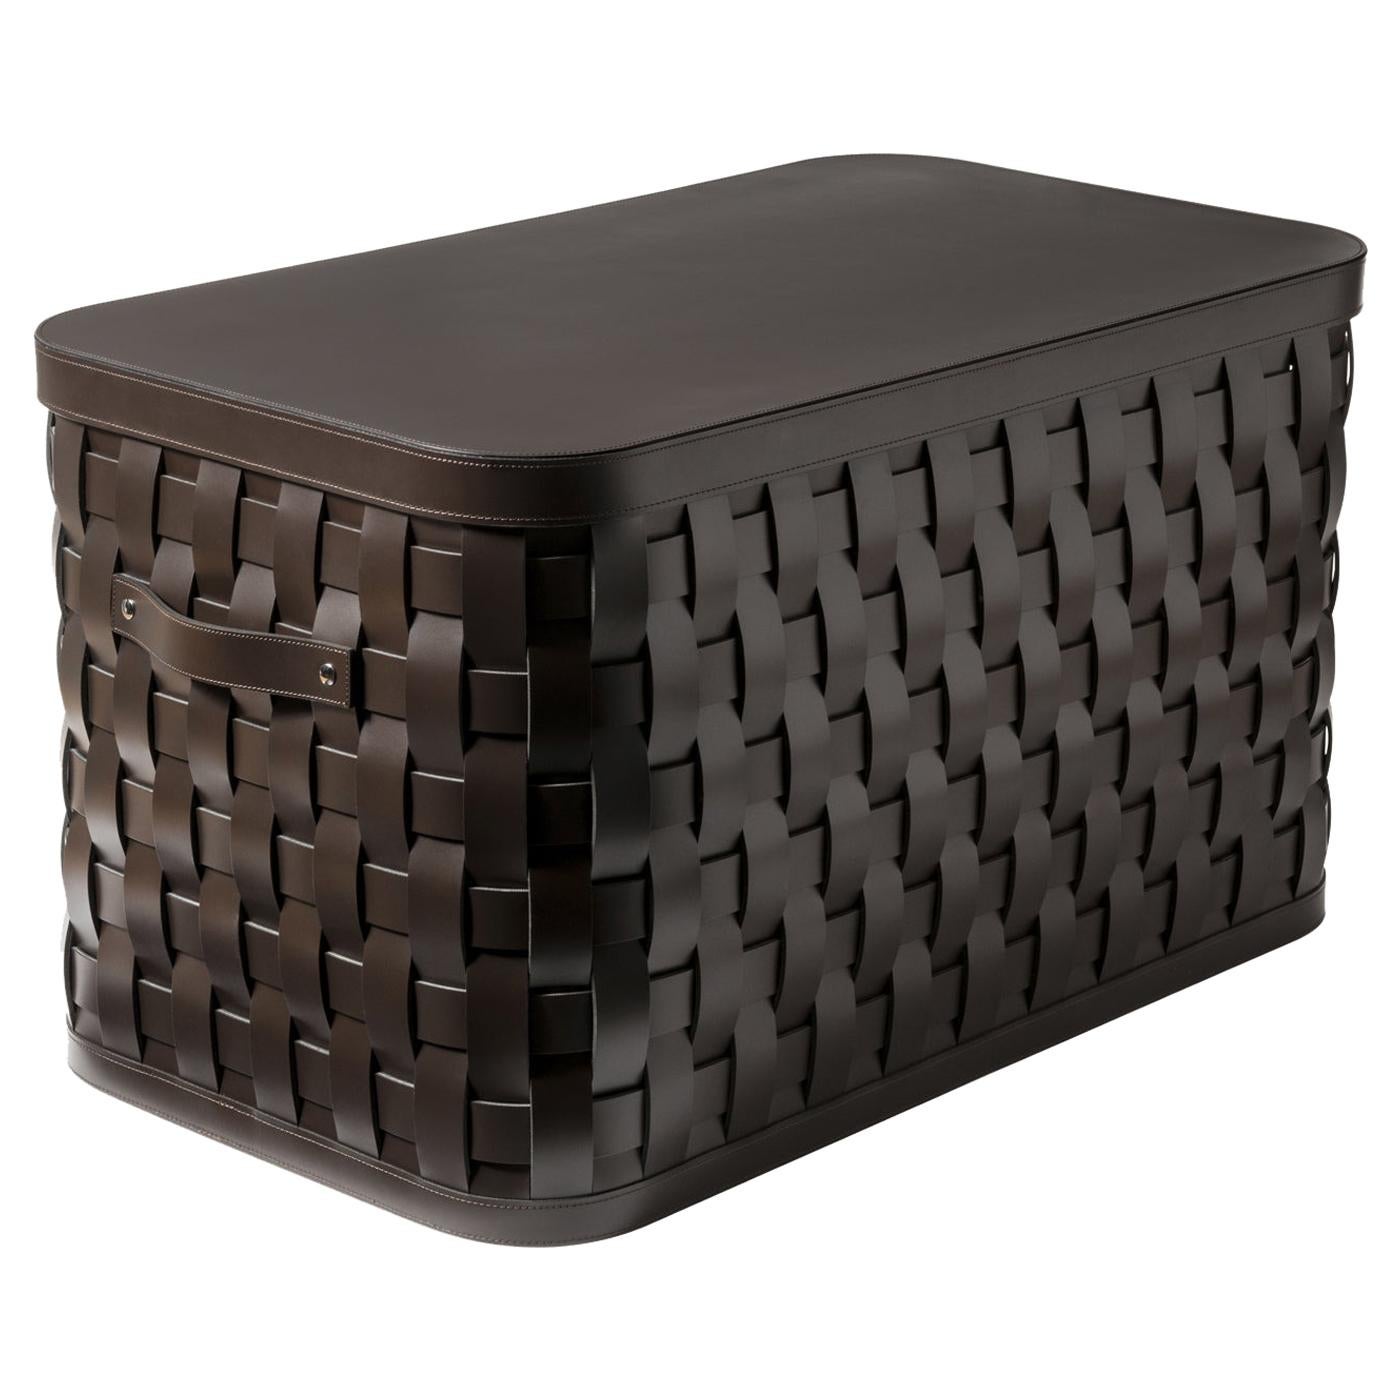 Demetra Brown Rectangular Tall Basket with Lid For Sale